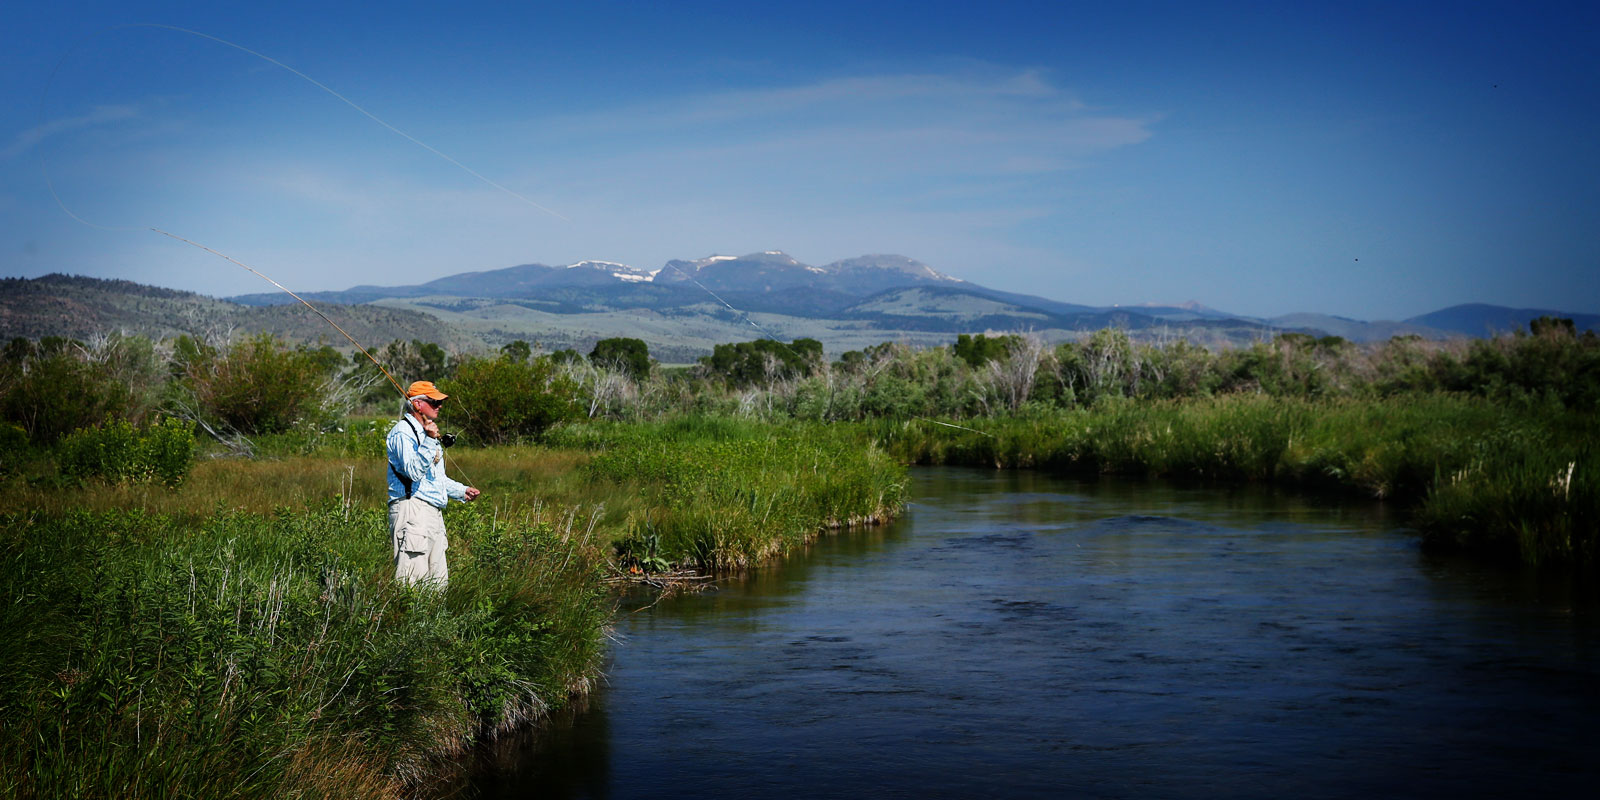 Fly rod makers Tom Morgan, Gerri Carlson create Unity with the Universe photo